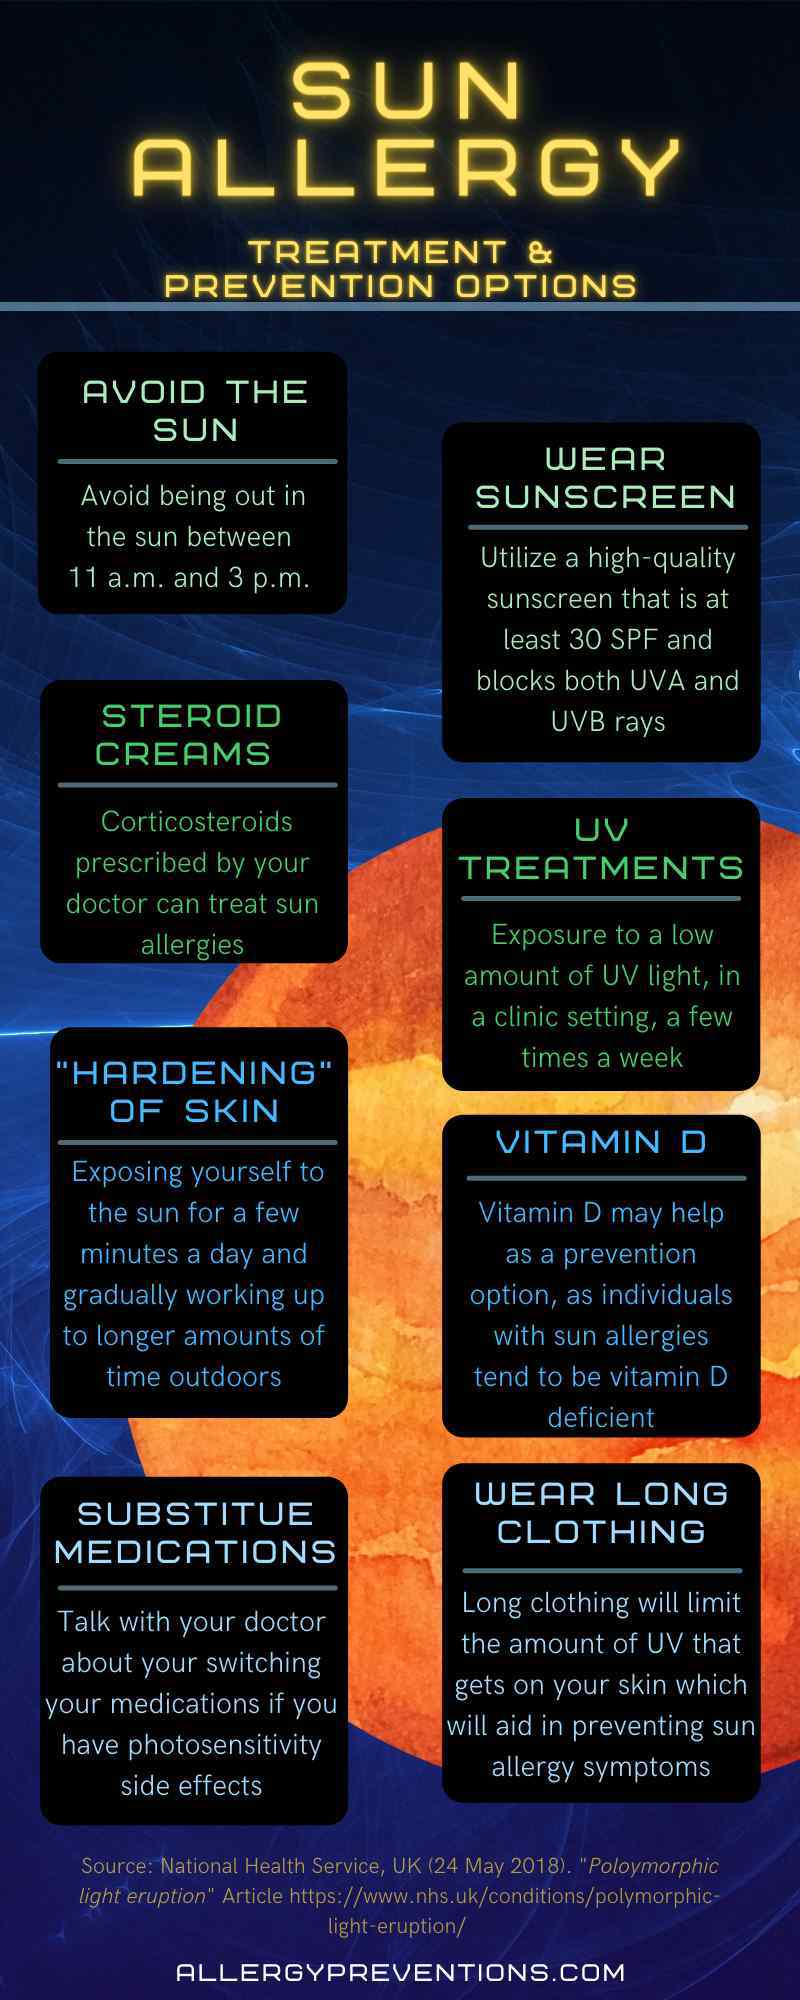 sun allergy treatment and prevention options infographic - avoid the sun, wear sunscreen, steroid creams, UV treatments, "hardening of skin" vitamin D, substitute medications, wear long clothing